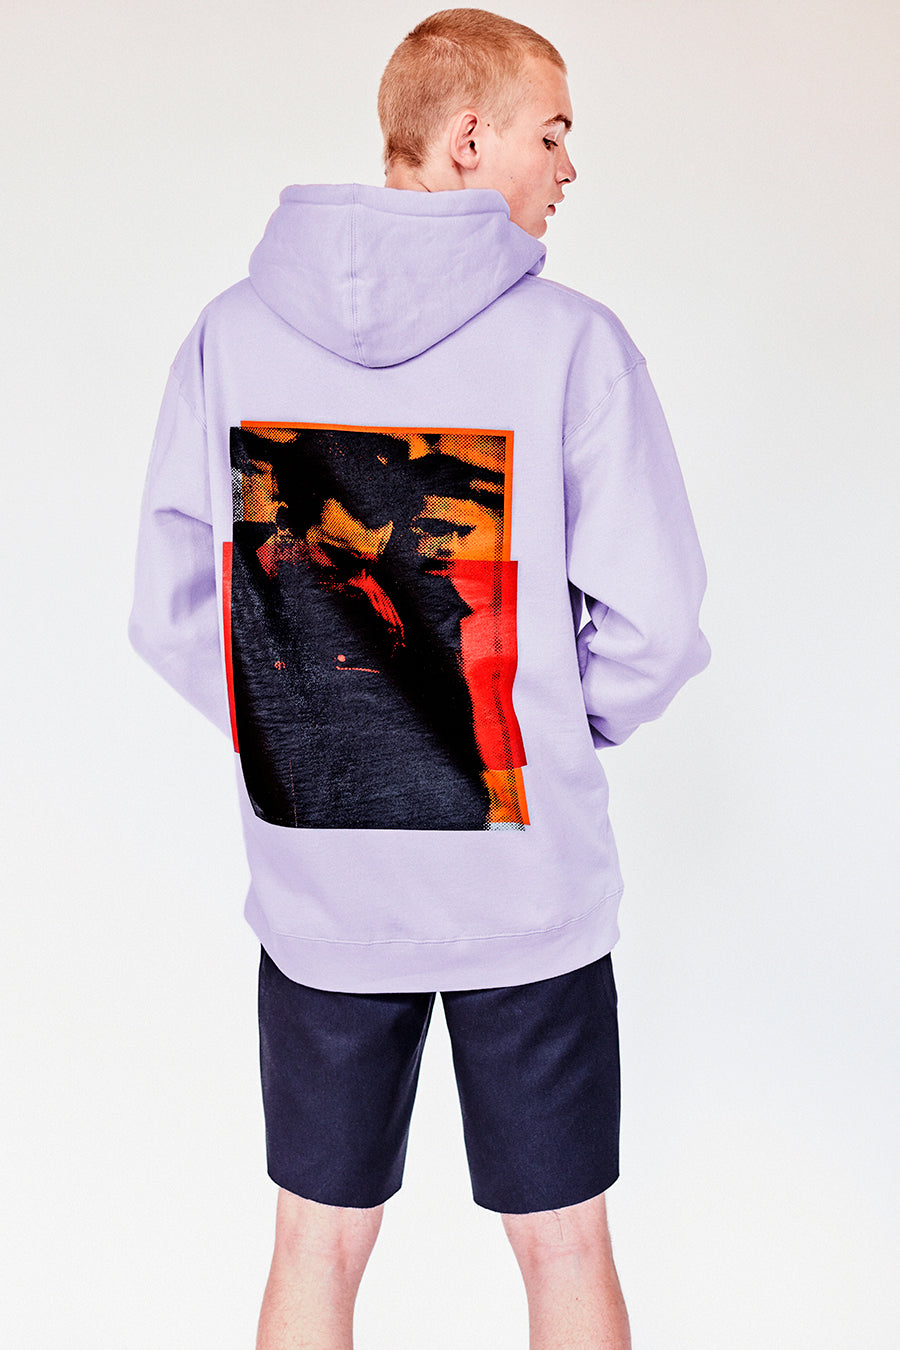 Brand New from New York City: Stmarksnewyork.com. Shop the St. Marks Couture Guys Lilac Hoodie: Featuring St. Marks Couture New York logo on chest and St. Marks guys image on the back. Hand silkscreen printed in New York with love.